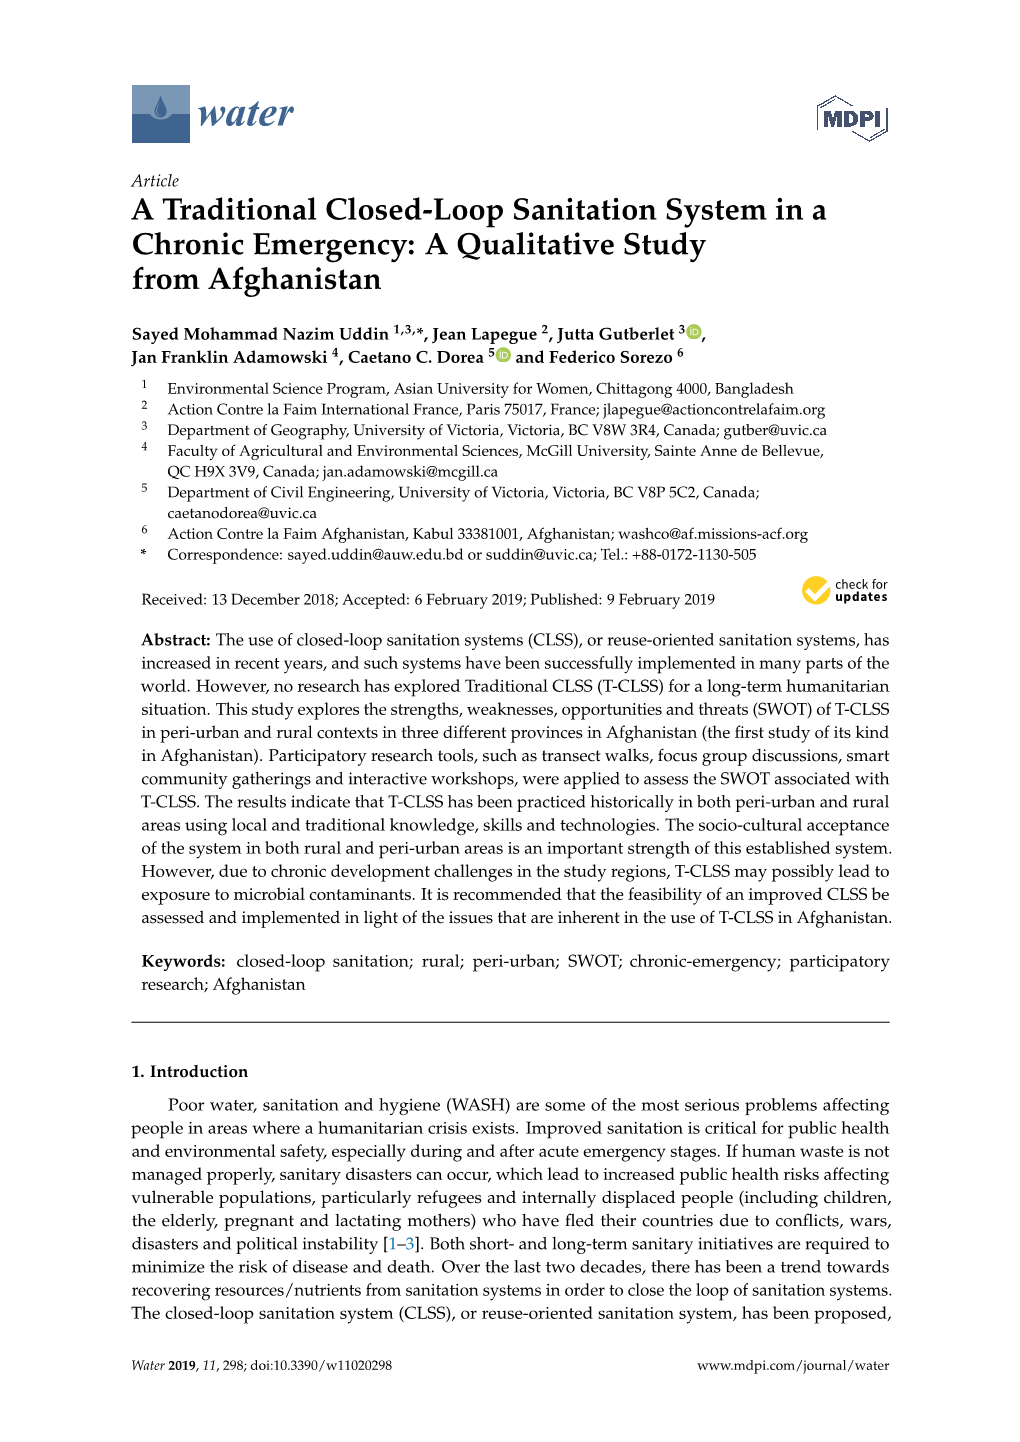 A Traditional Closed-Loop Sanitation System in a Chronic Emergency: a Qualitative Study from Afghanistan